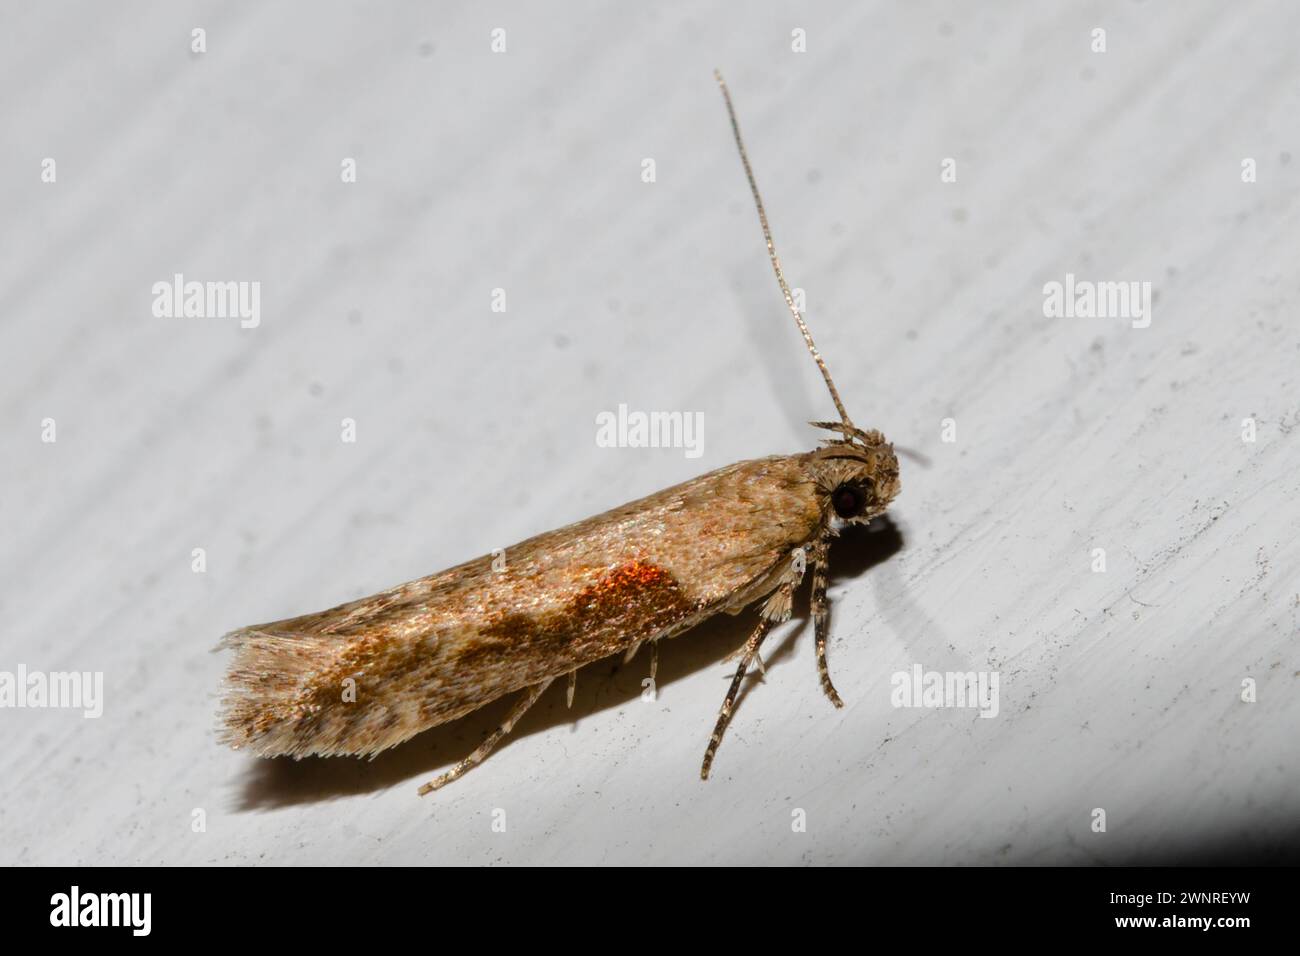 Tomato Stemborer Moth, Symmetrischema tangolias, introduced to New Zealand from South America, Nelson, South Island, New Zealand Stock Photo